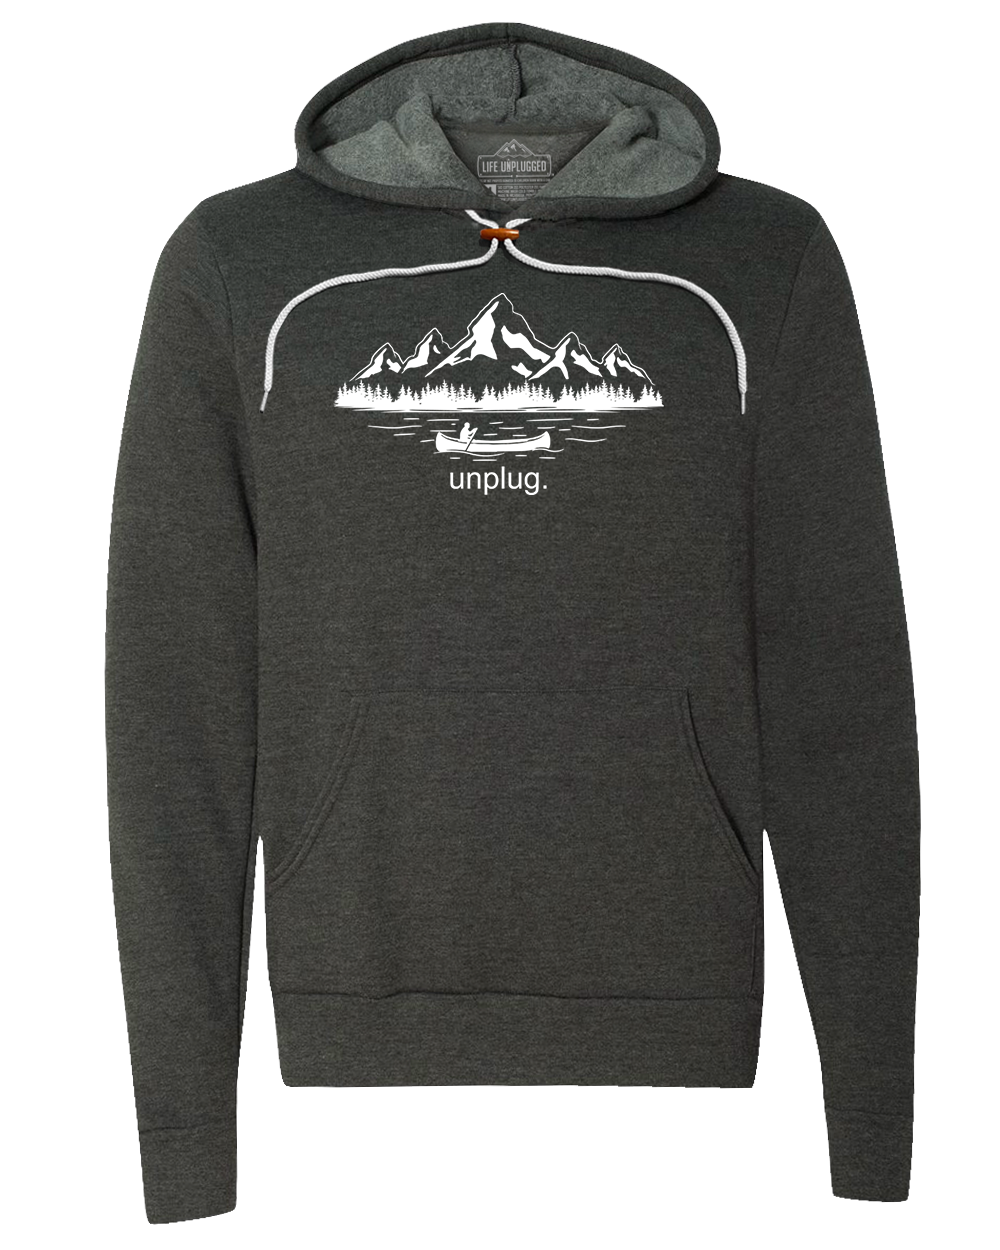 Canoeing in the Mountains Premium Super Soft Hooded Sweatshirt